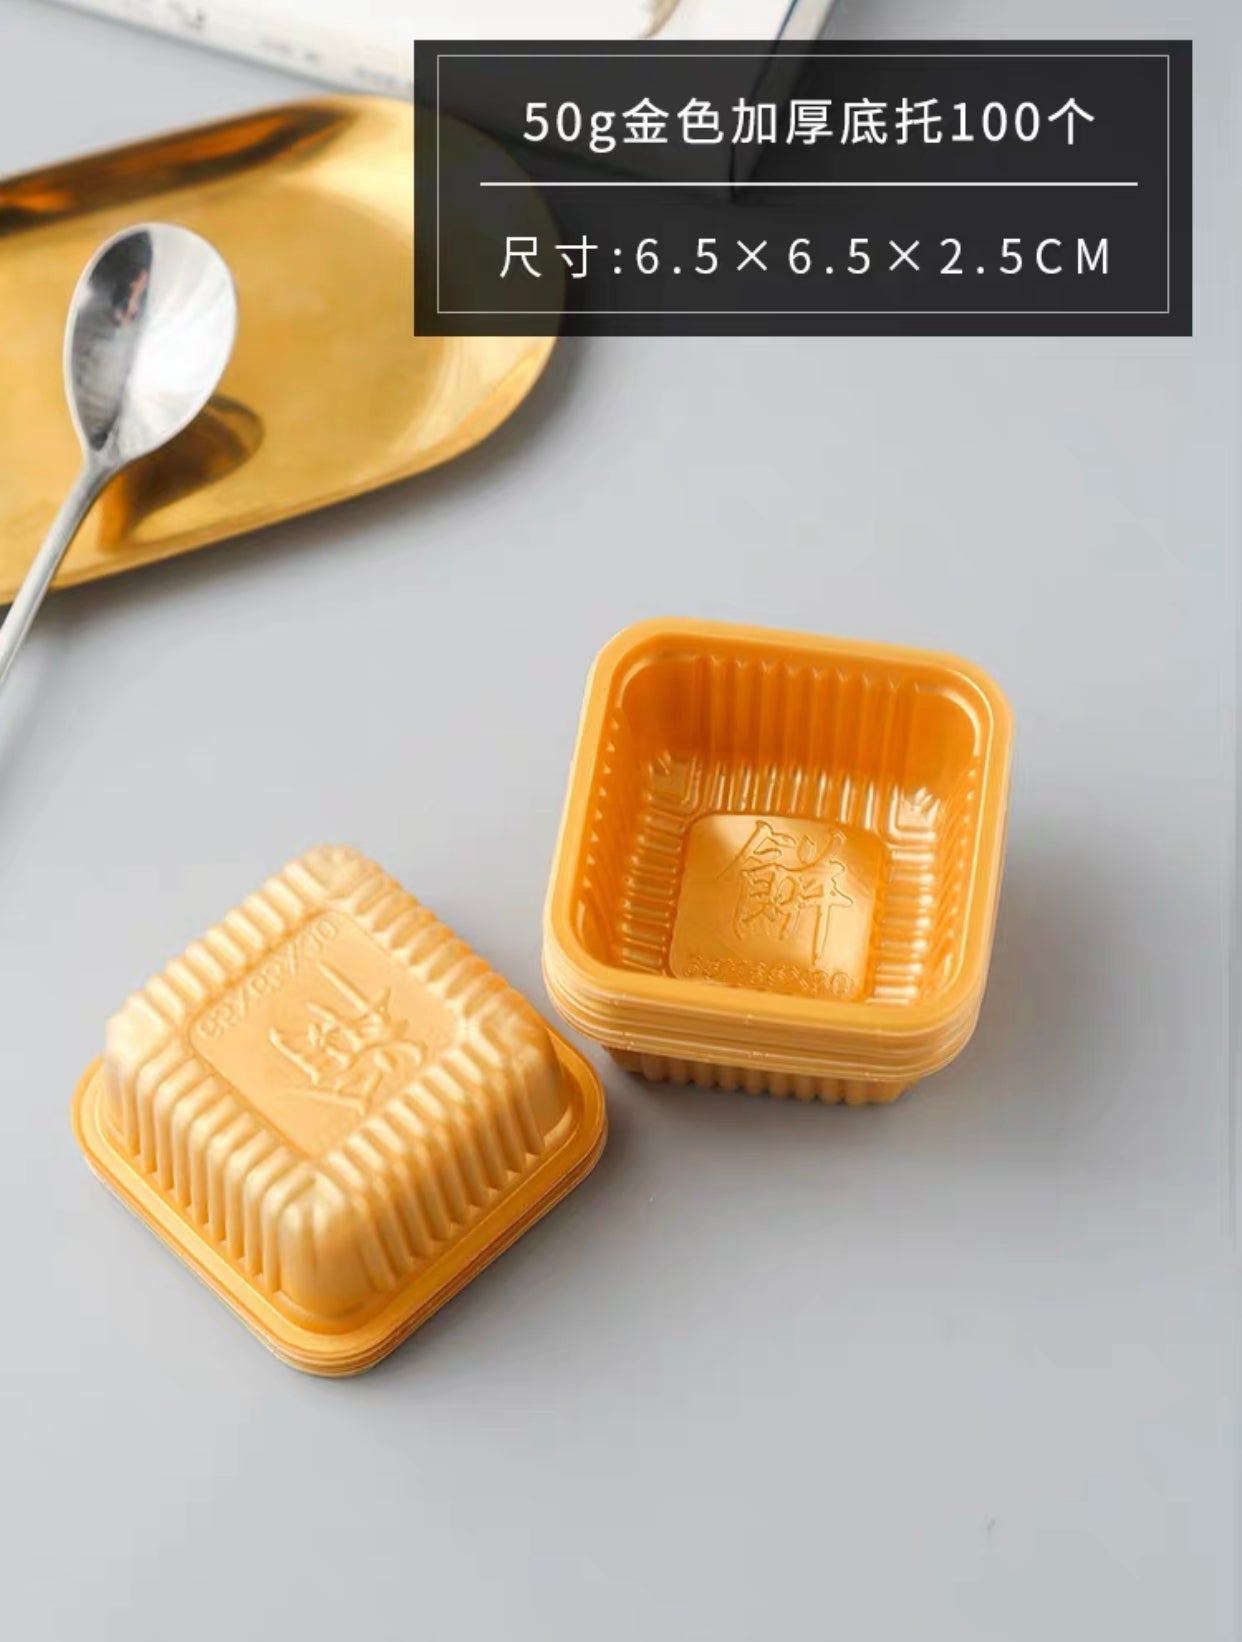 [PRE-ORDER - NO CANCELLATION] Mooncake Tray/Container Packaging 50g